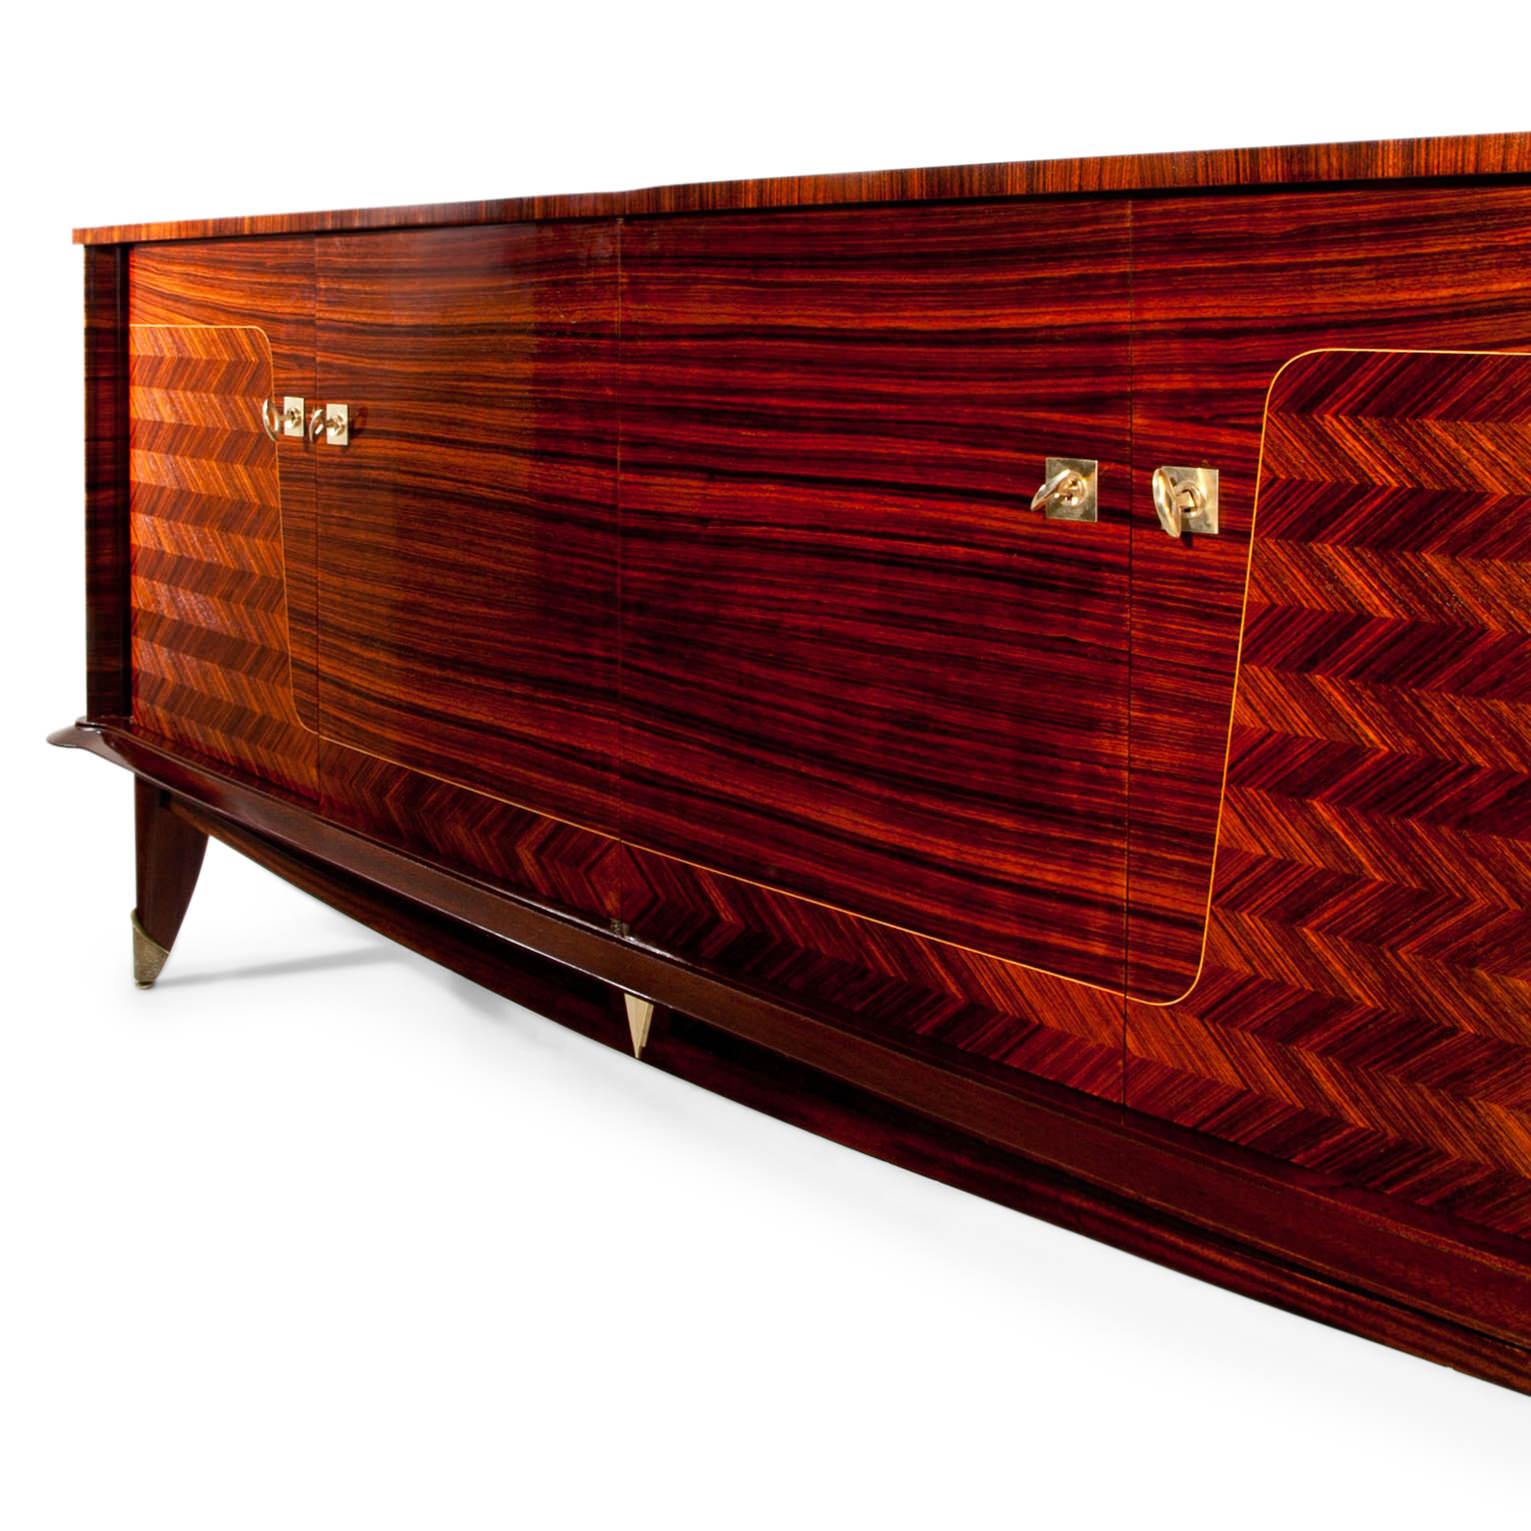 Long sideboard with four doors, standing on tapered feet with brass caps. At the front and on top crisscross patterned veneer as well as a horizontal veneer pattern that is separated with a thin thread inlay. The interior is in maple and has shelves